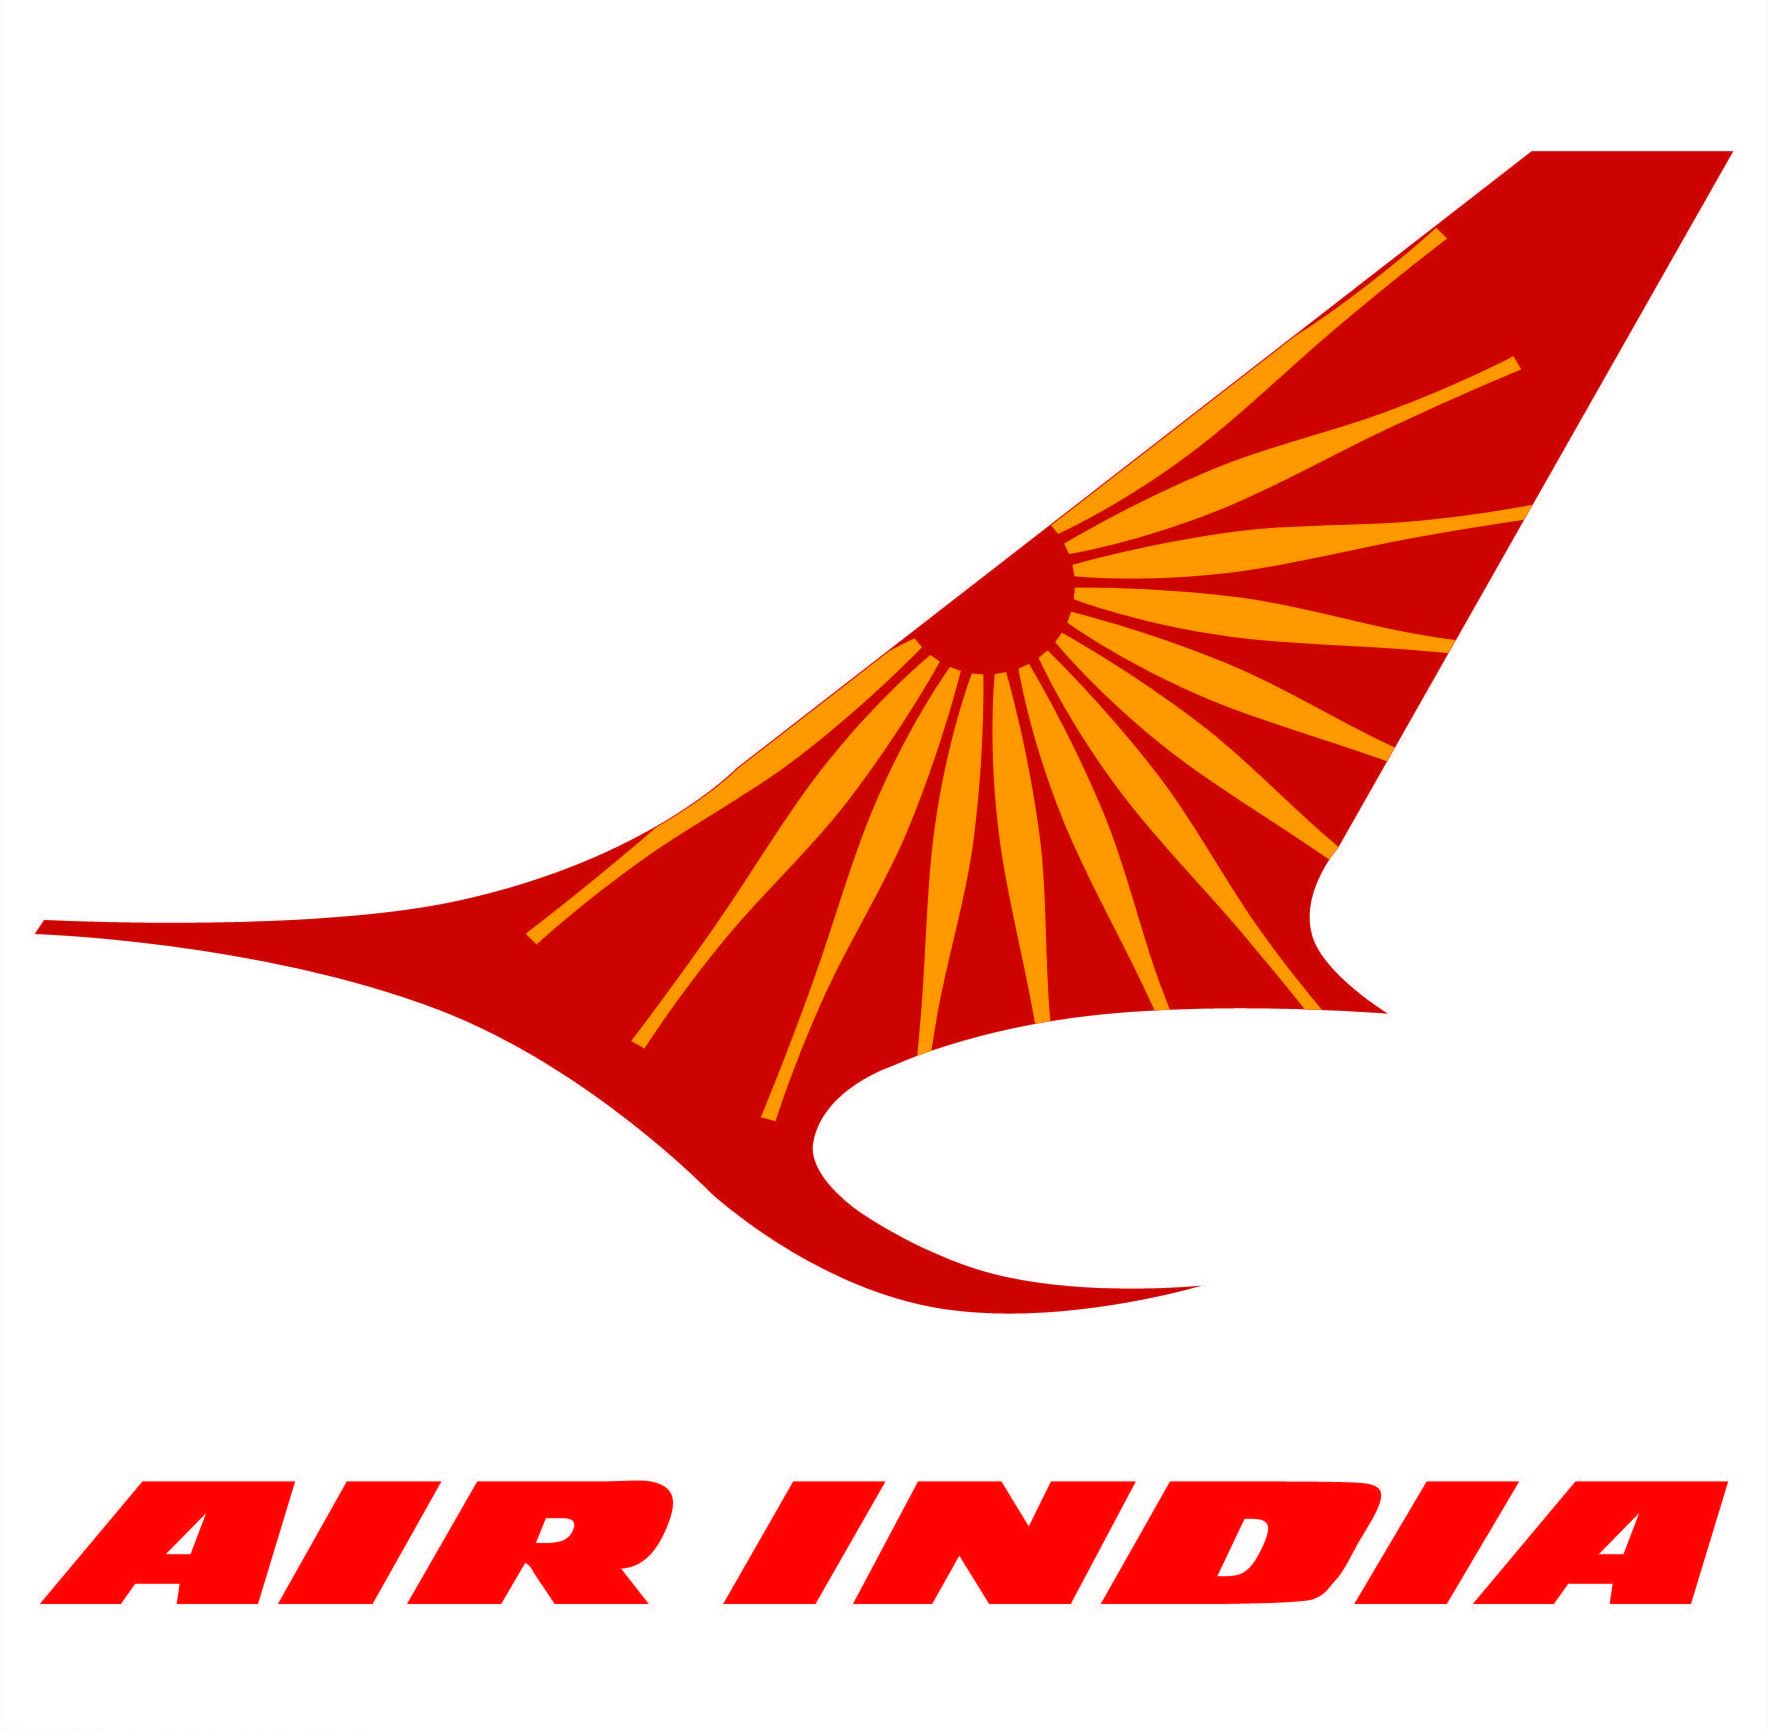 Air India Notification 2022 – Opening for Various Trainee Posts | Apply Online